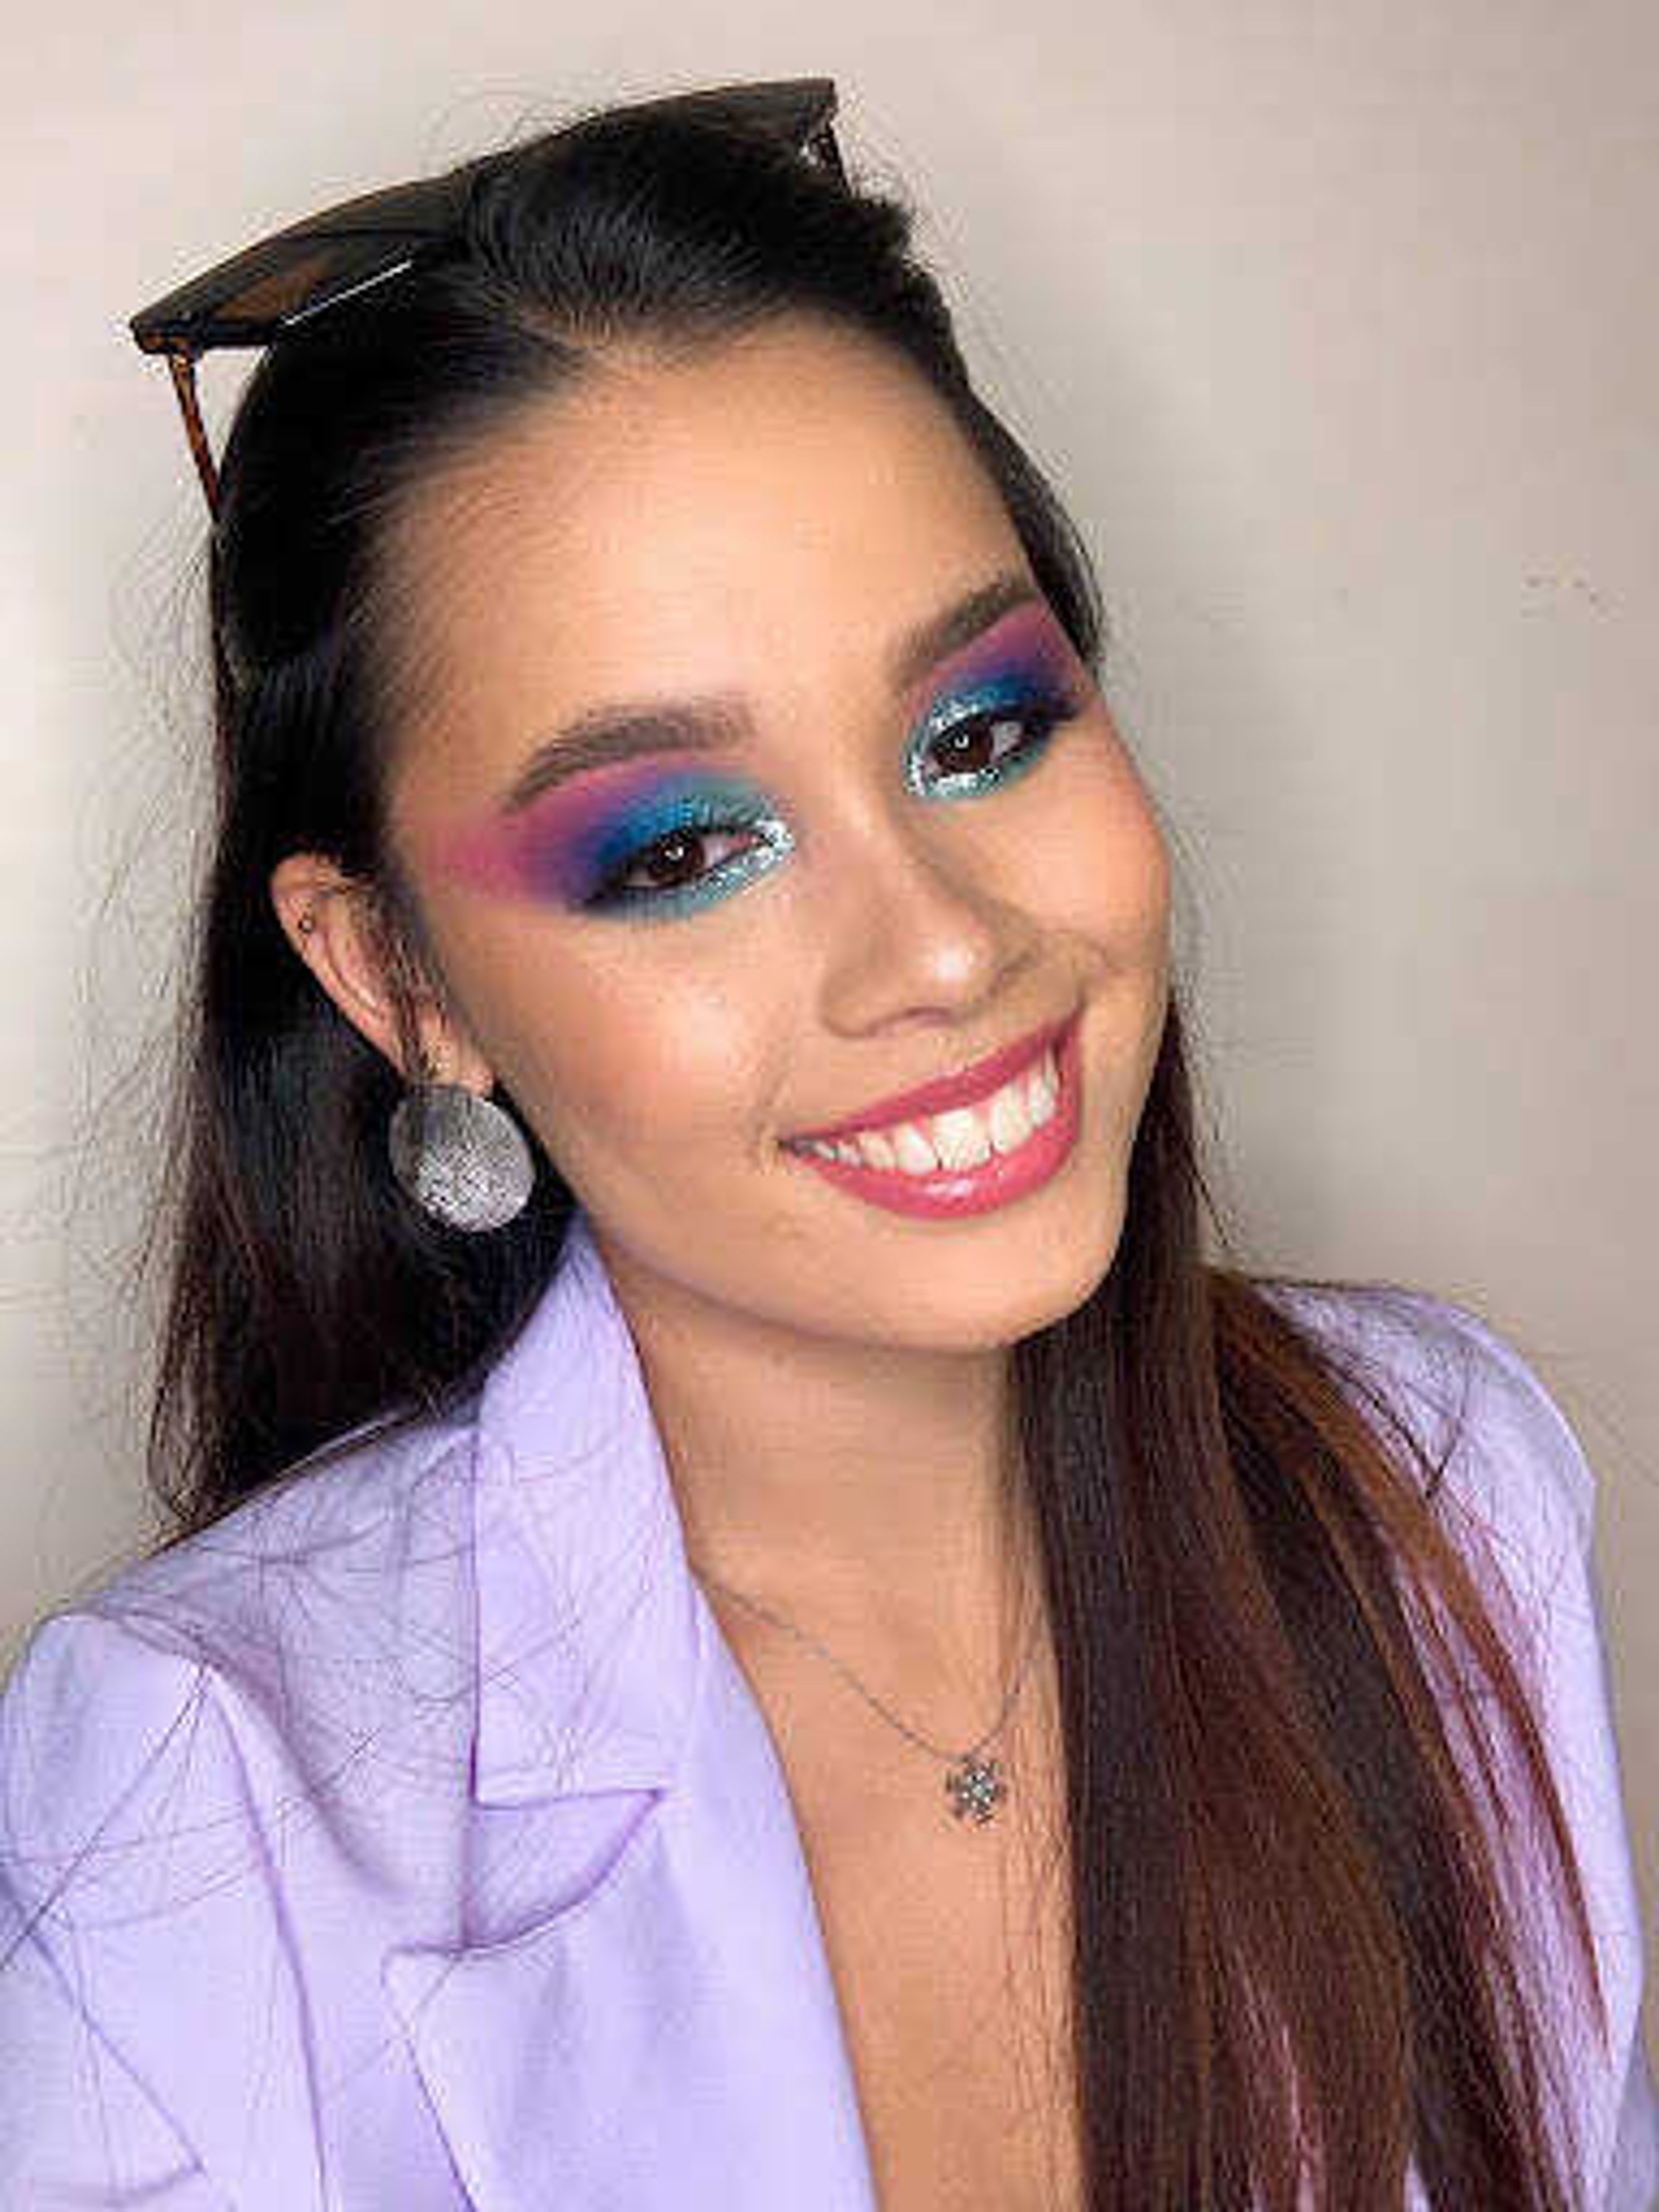 This is just one of Isabelle's many colored eye glam looks she has created. To see more makeup looks, individuals can follow Isabelle on Instagram, @isabelle_nakamura.